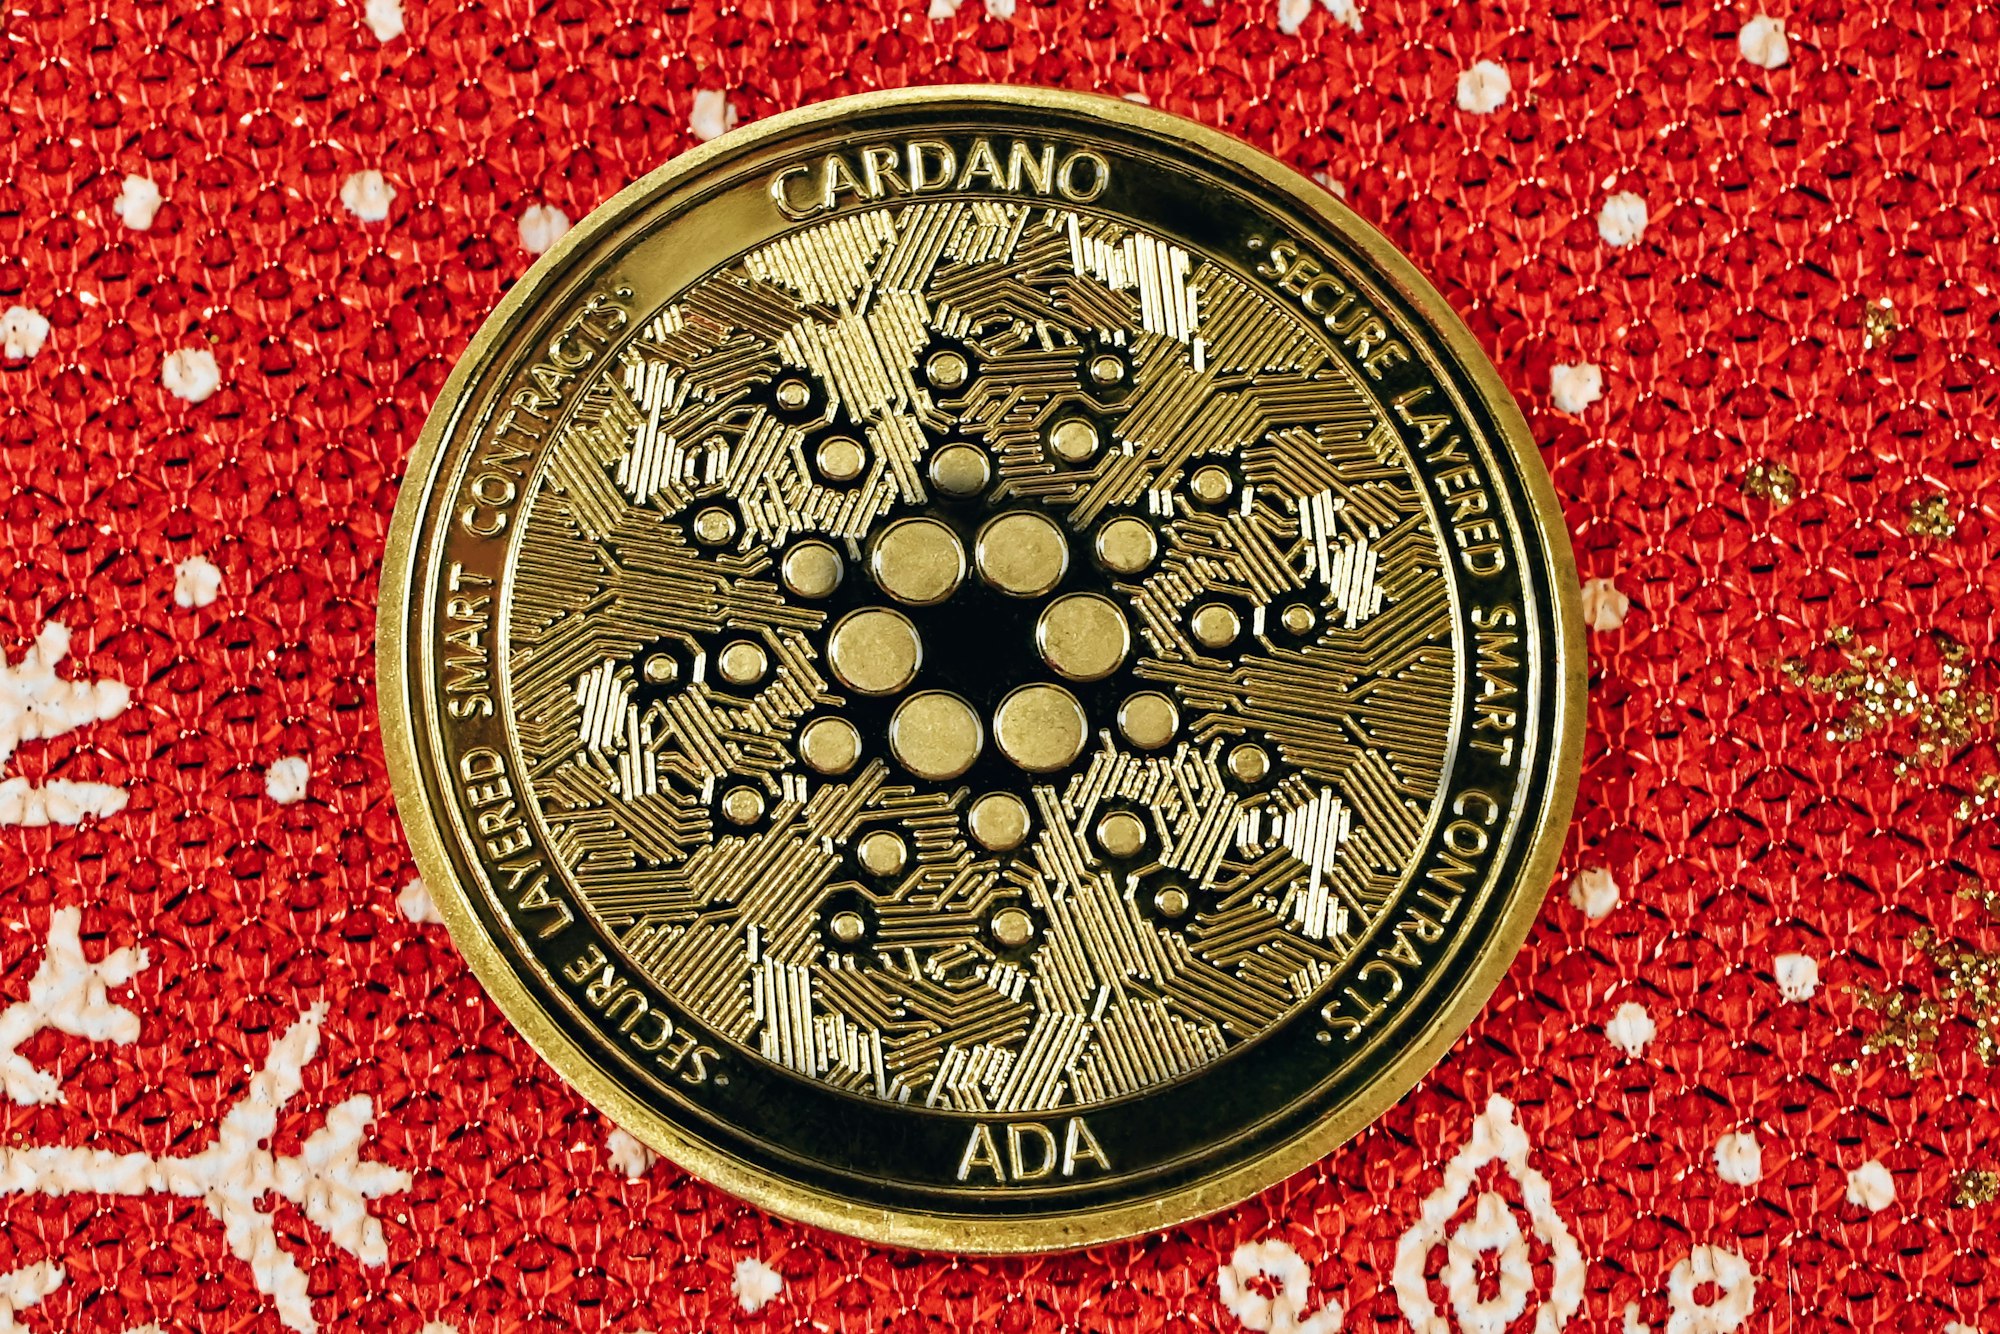 A black Cardano coin on a red background